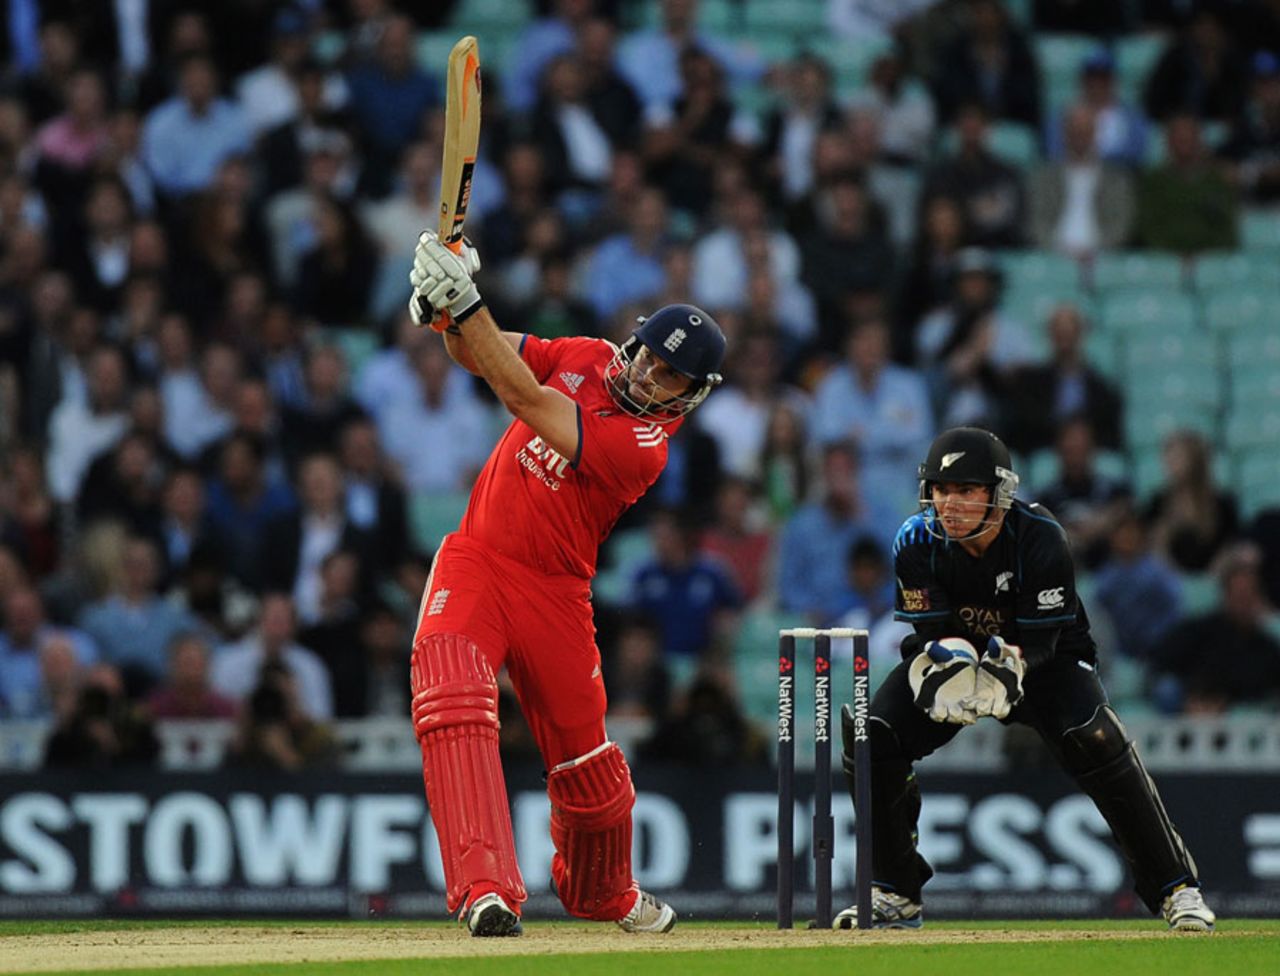 Michael Lumb helped give England a strong start to their chase, England v New Zealand, 1st T20, The Oval, June 25, 2013